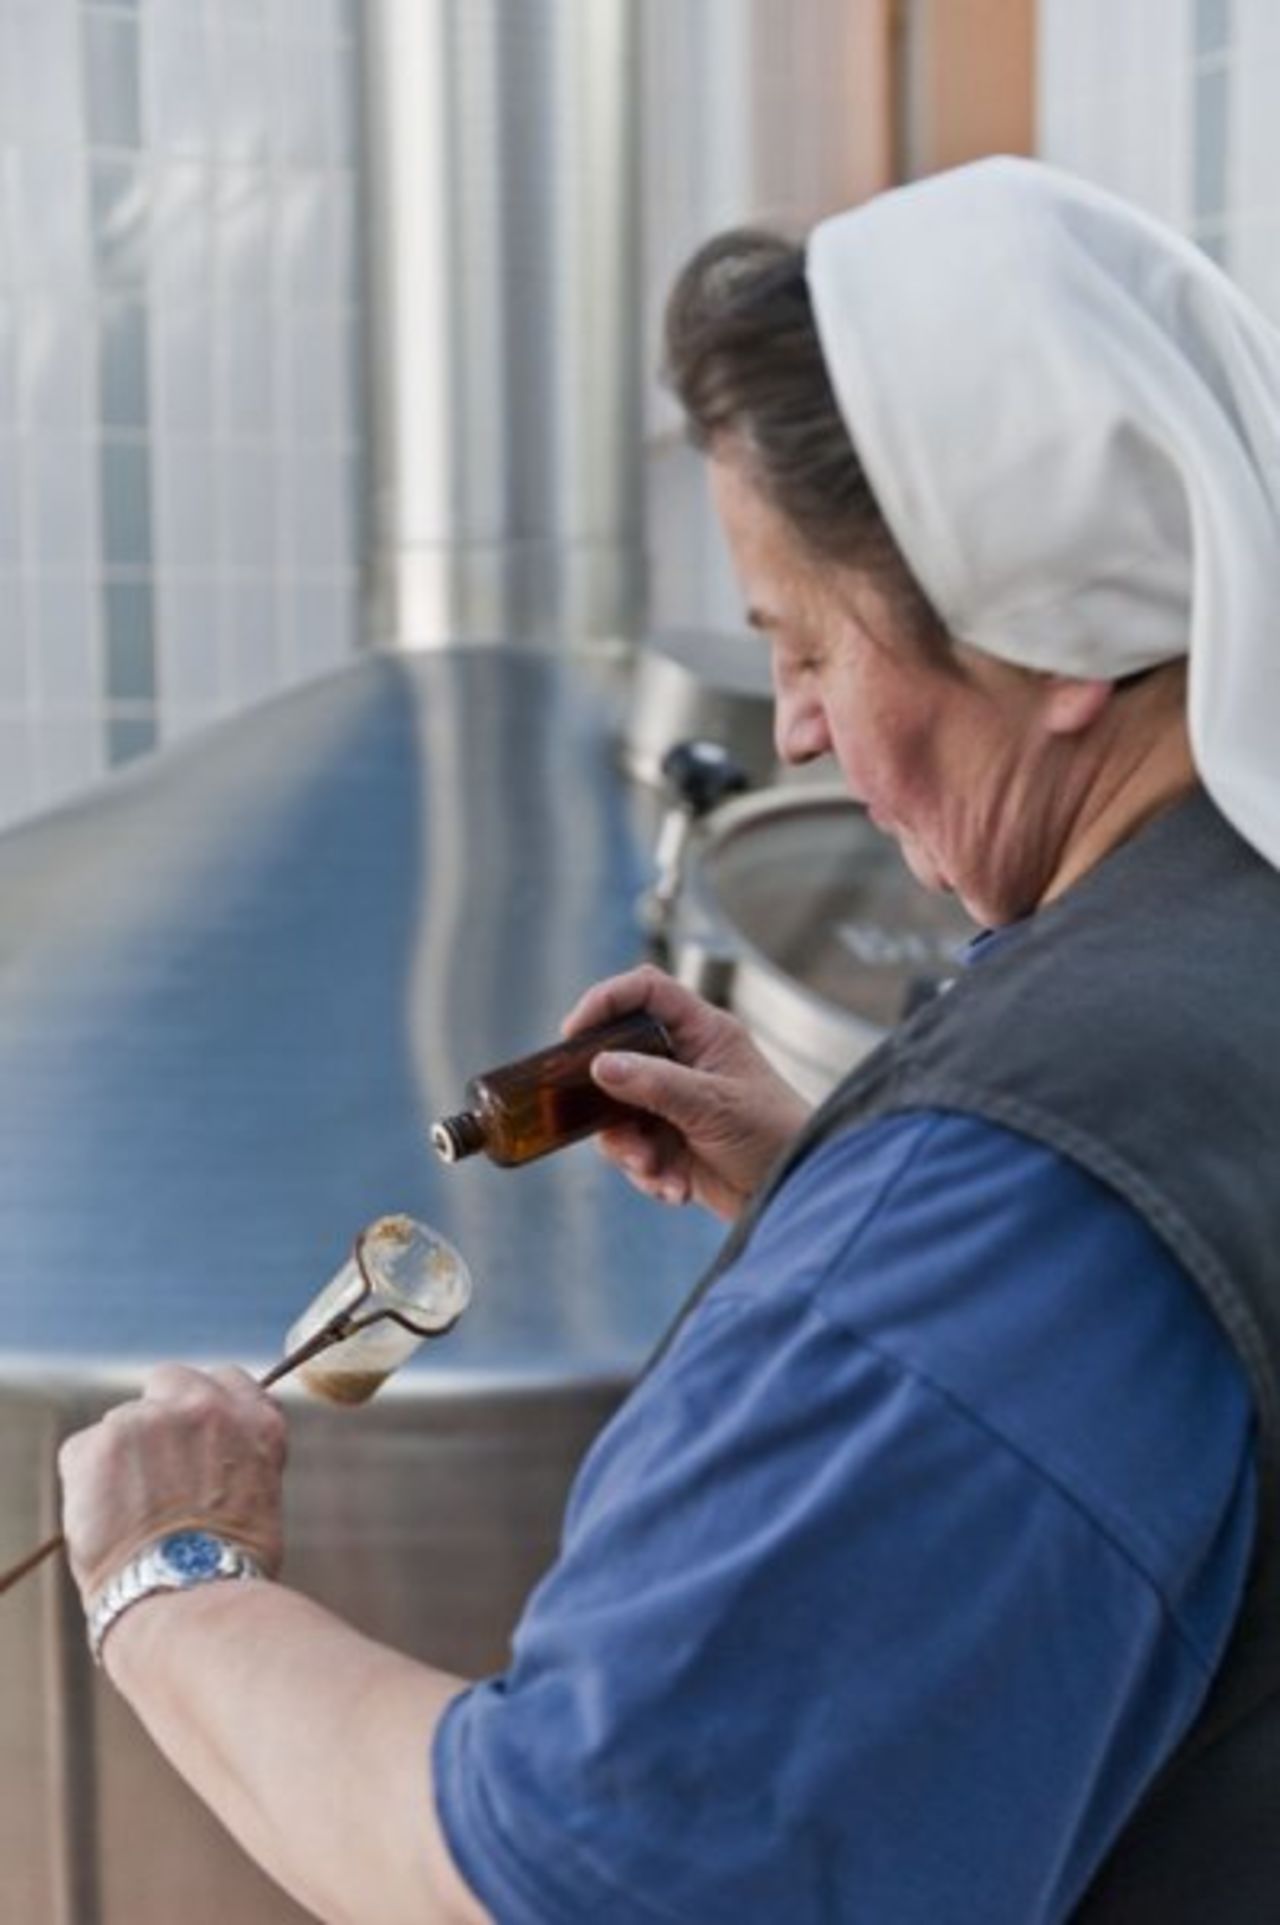 Sister Doris (pictured) is one of only a handful of women working in the beer industry in Bavaria.